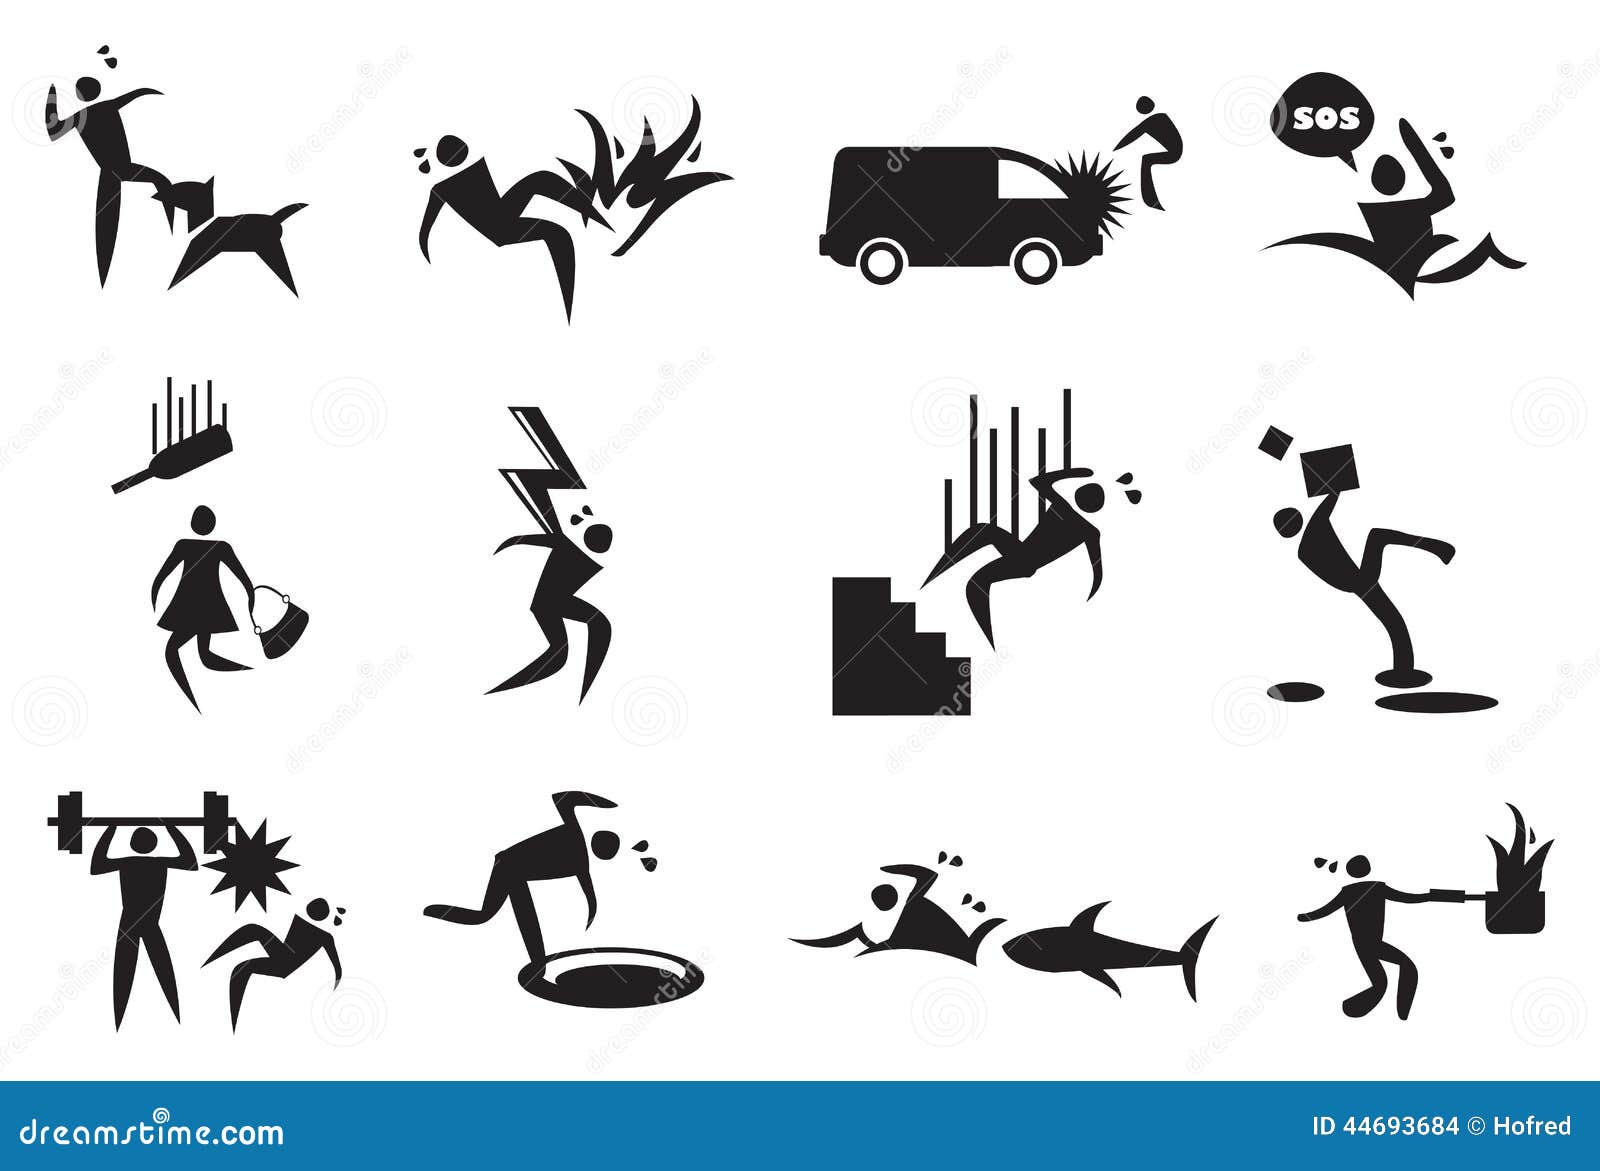 home accidents clipart - photo #29